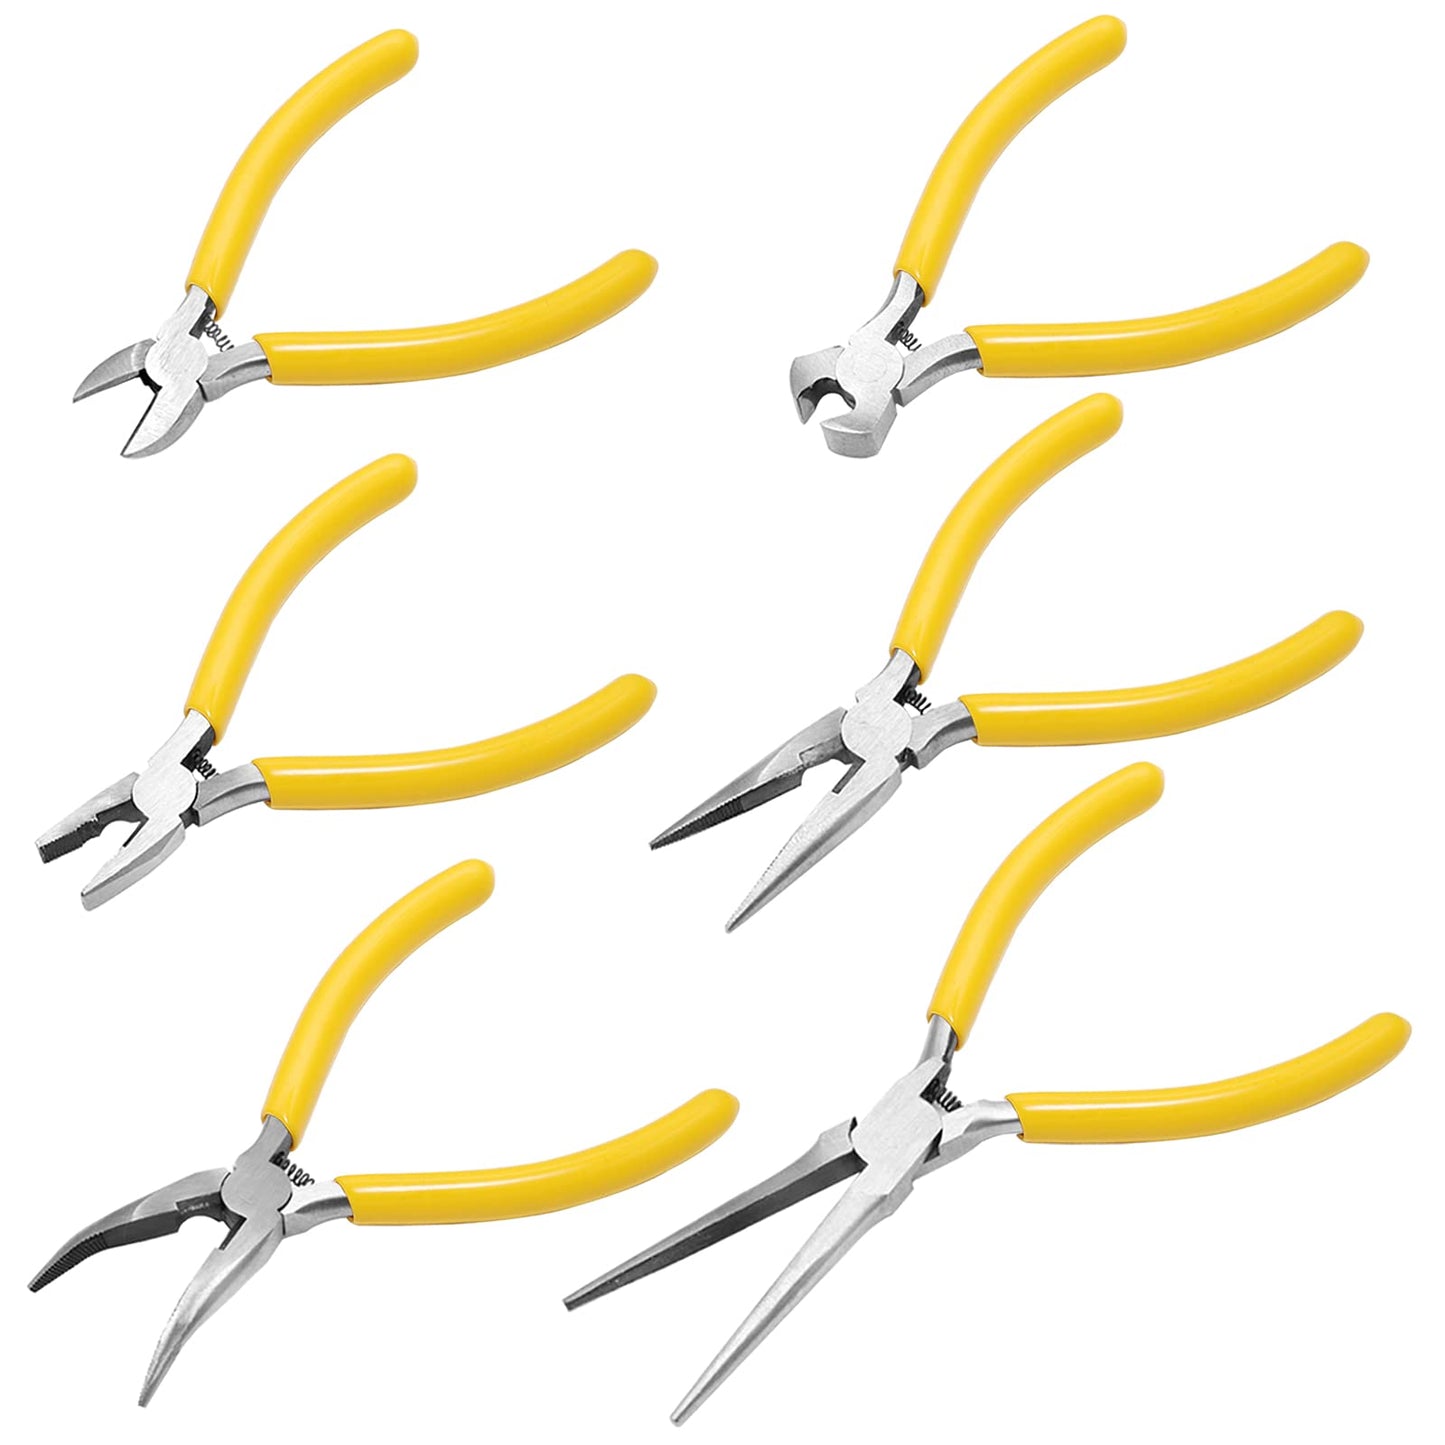 6-Piece Jewelers Pliers Set Jewelry Tools Kit, SourceTon Jewelry Making Tool Kit for Jewelry Beading Repair Making Supplies